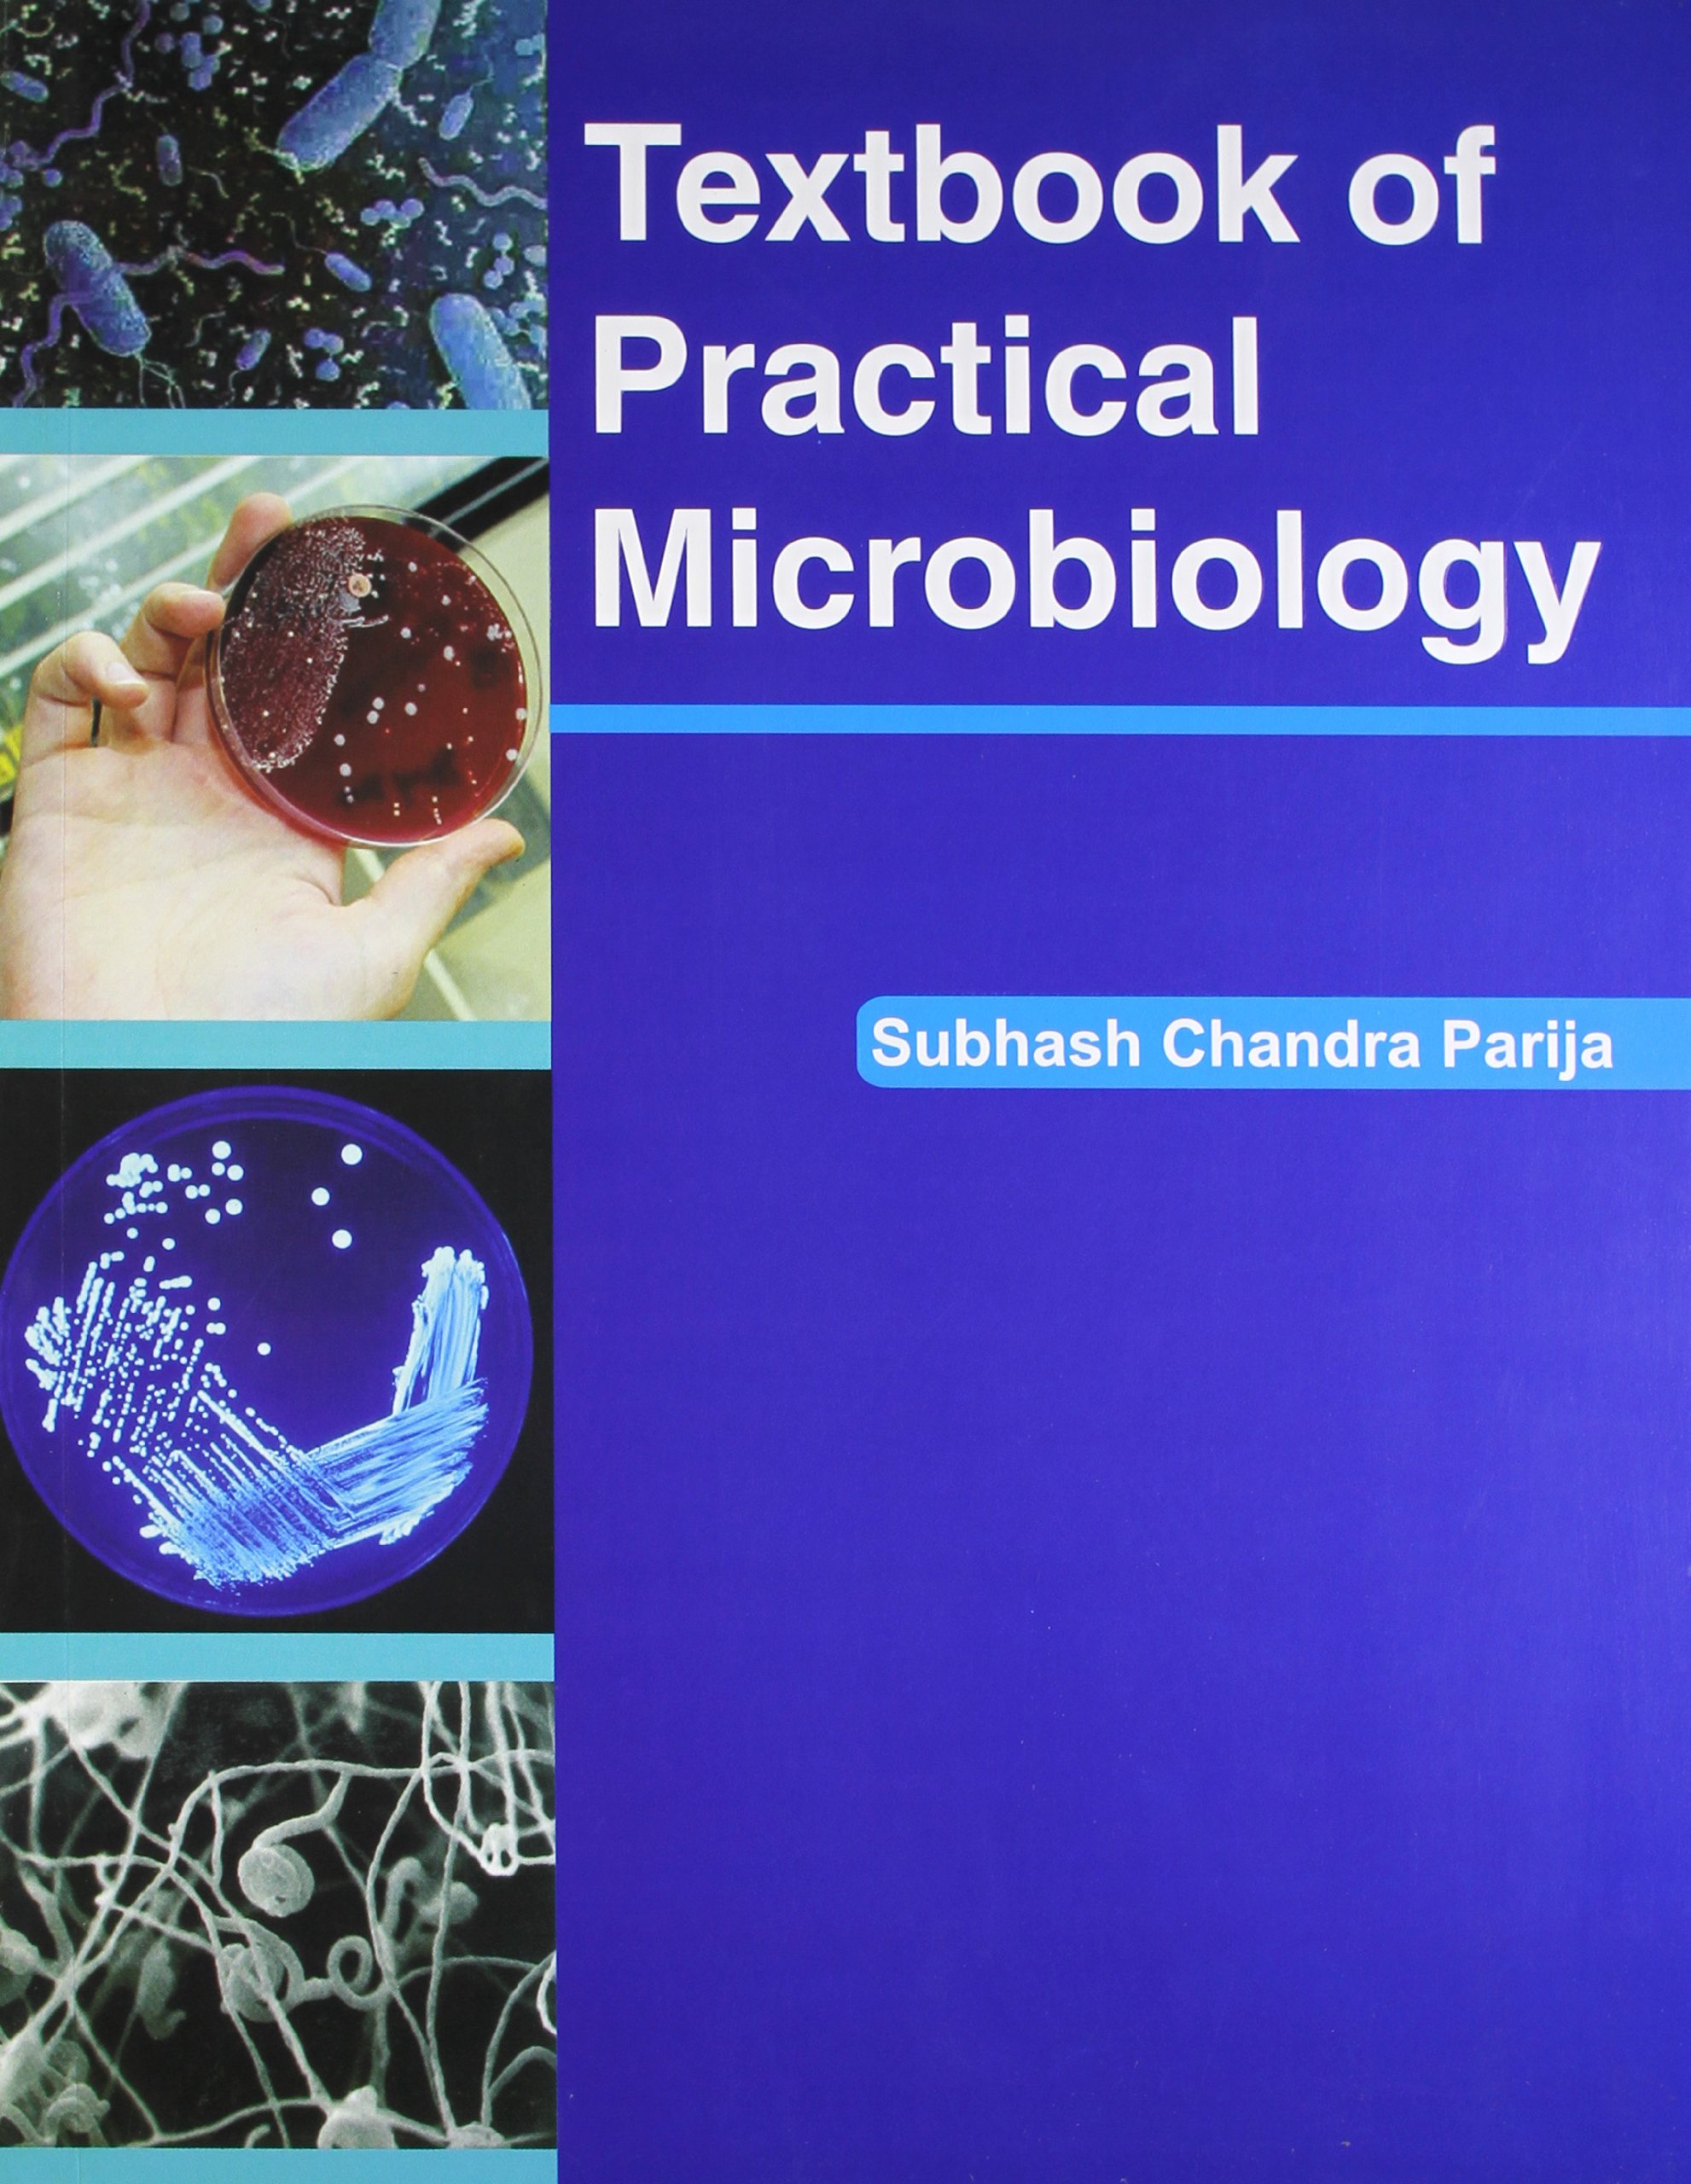 Buy Textbook Of Practical Microbiology Book Online at Low Prices in ...